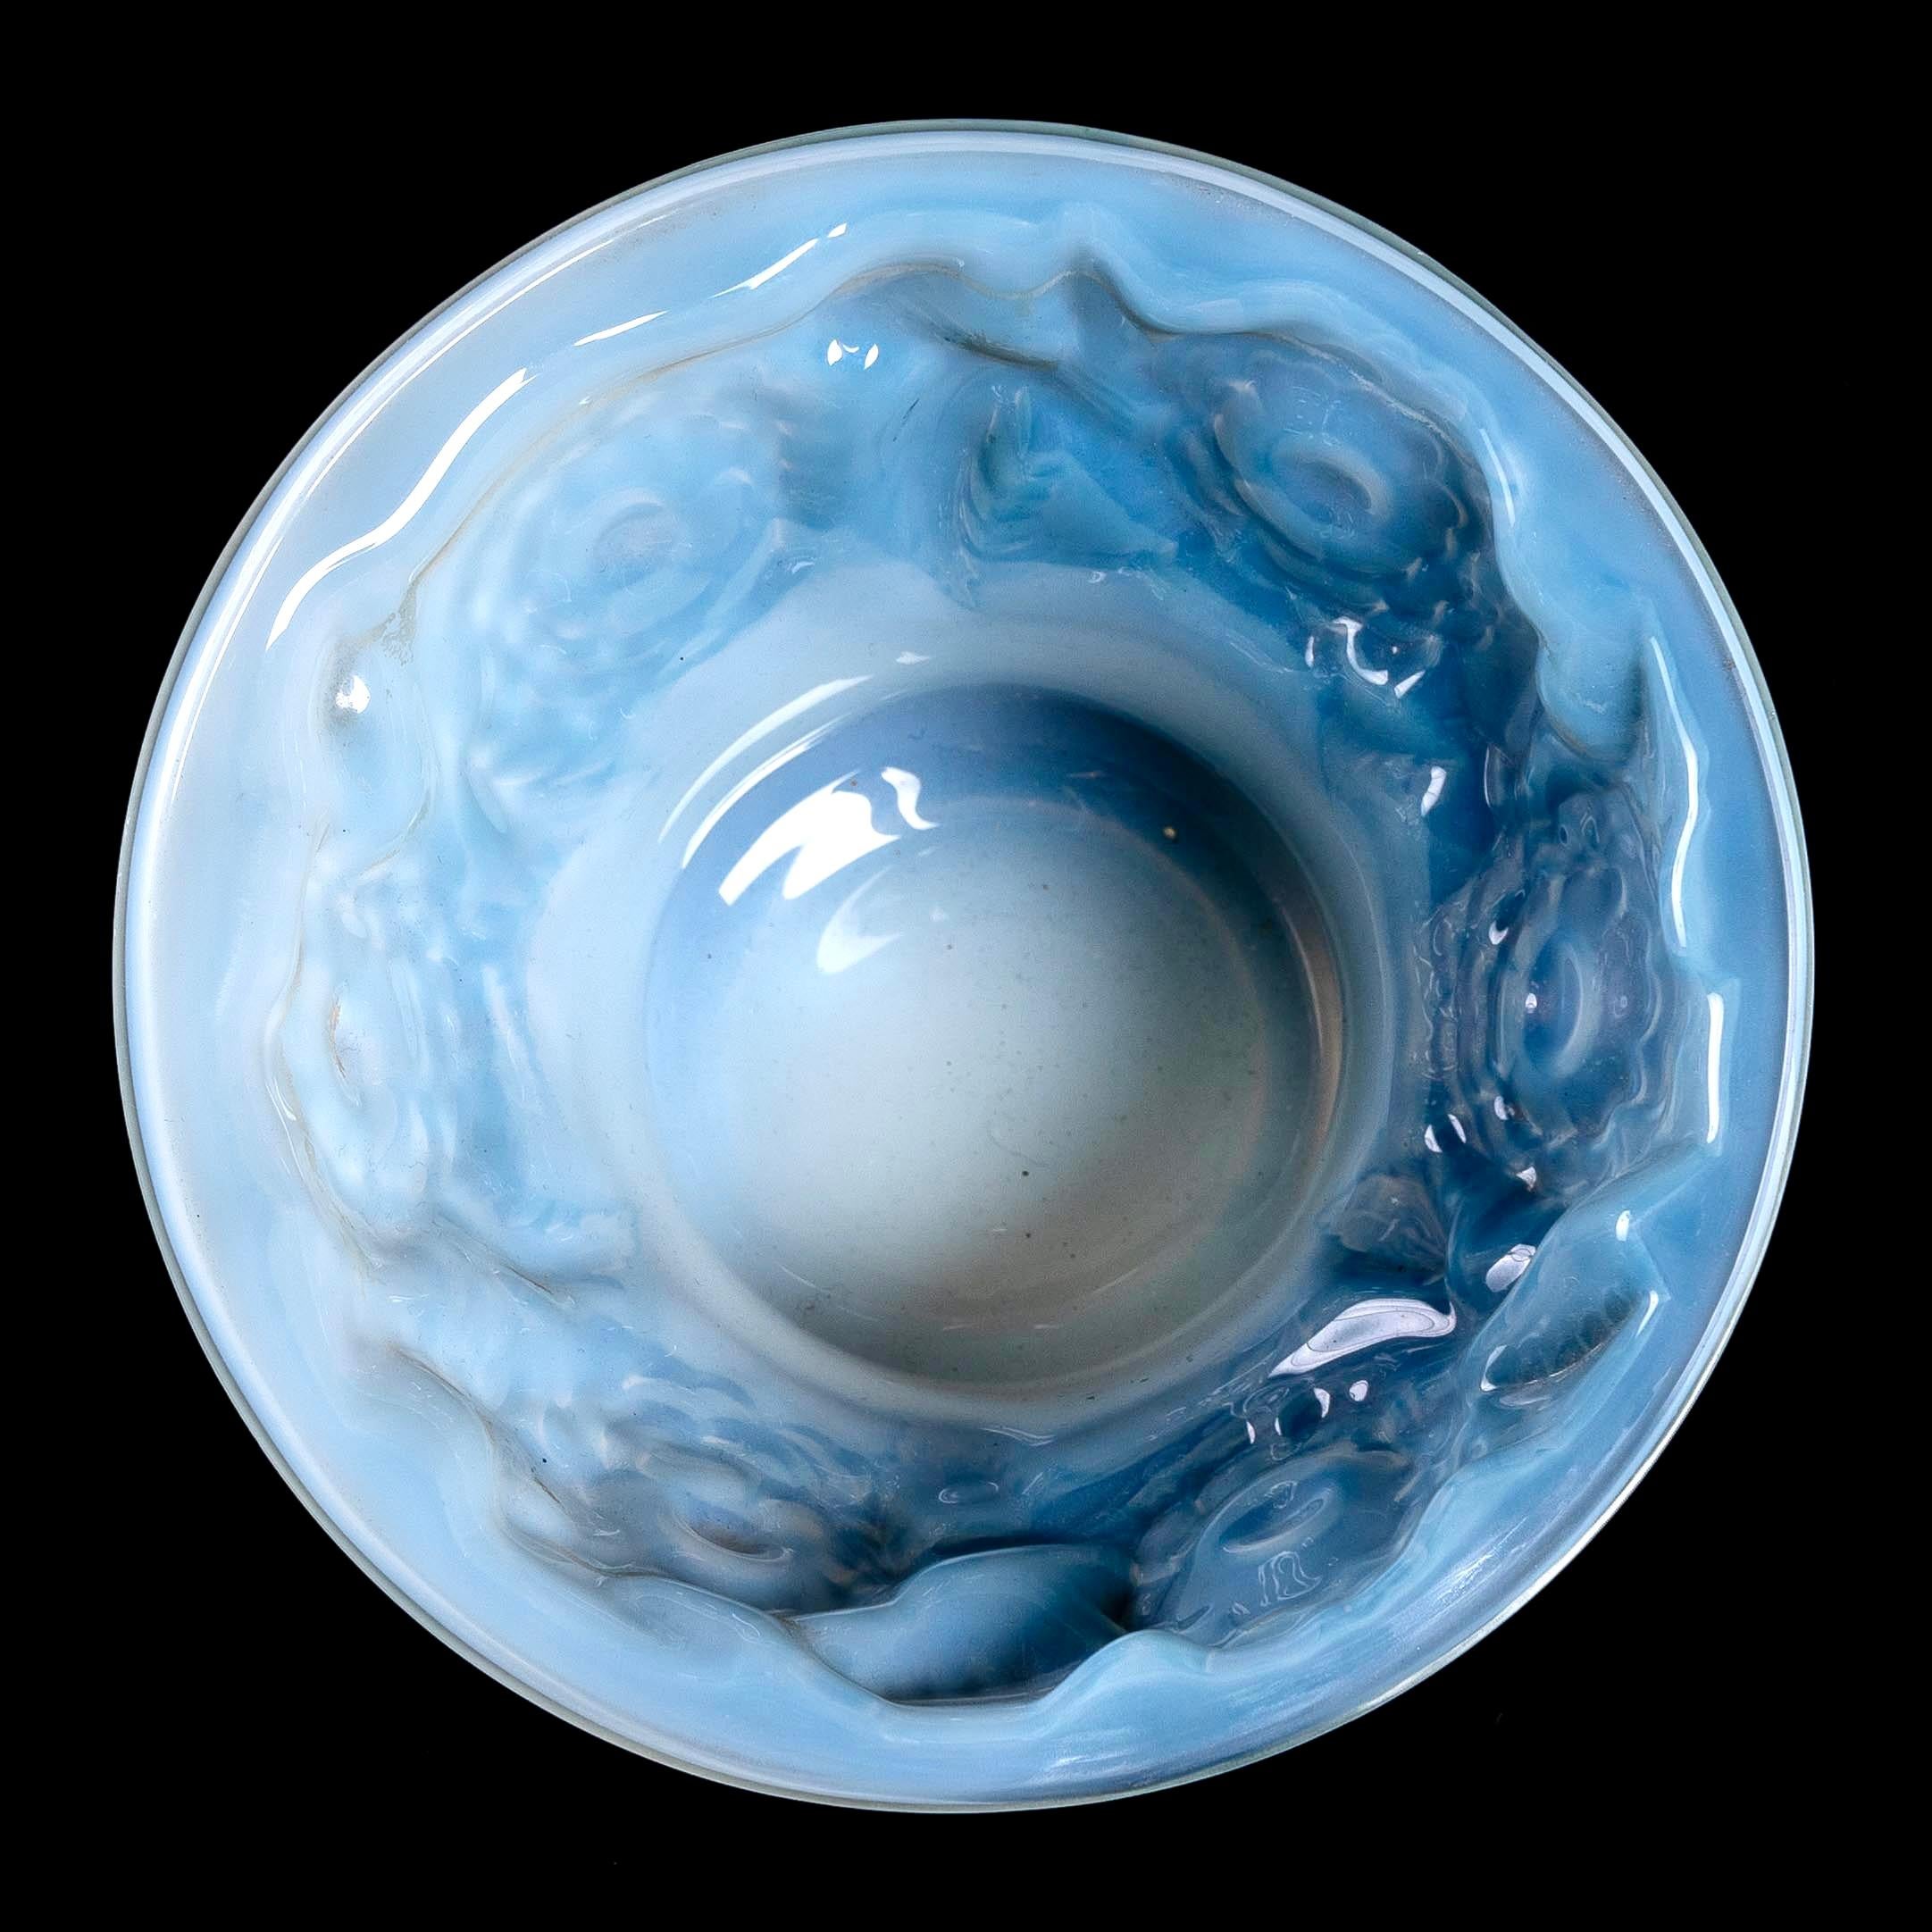 French 1930 René Lalique Orleans Vase in Double Cased Opalescent Glass with Blue Patina